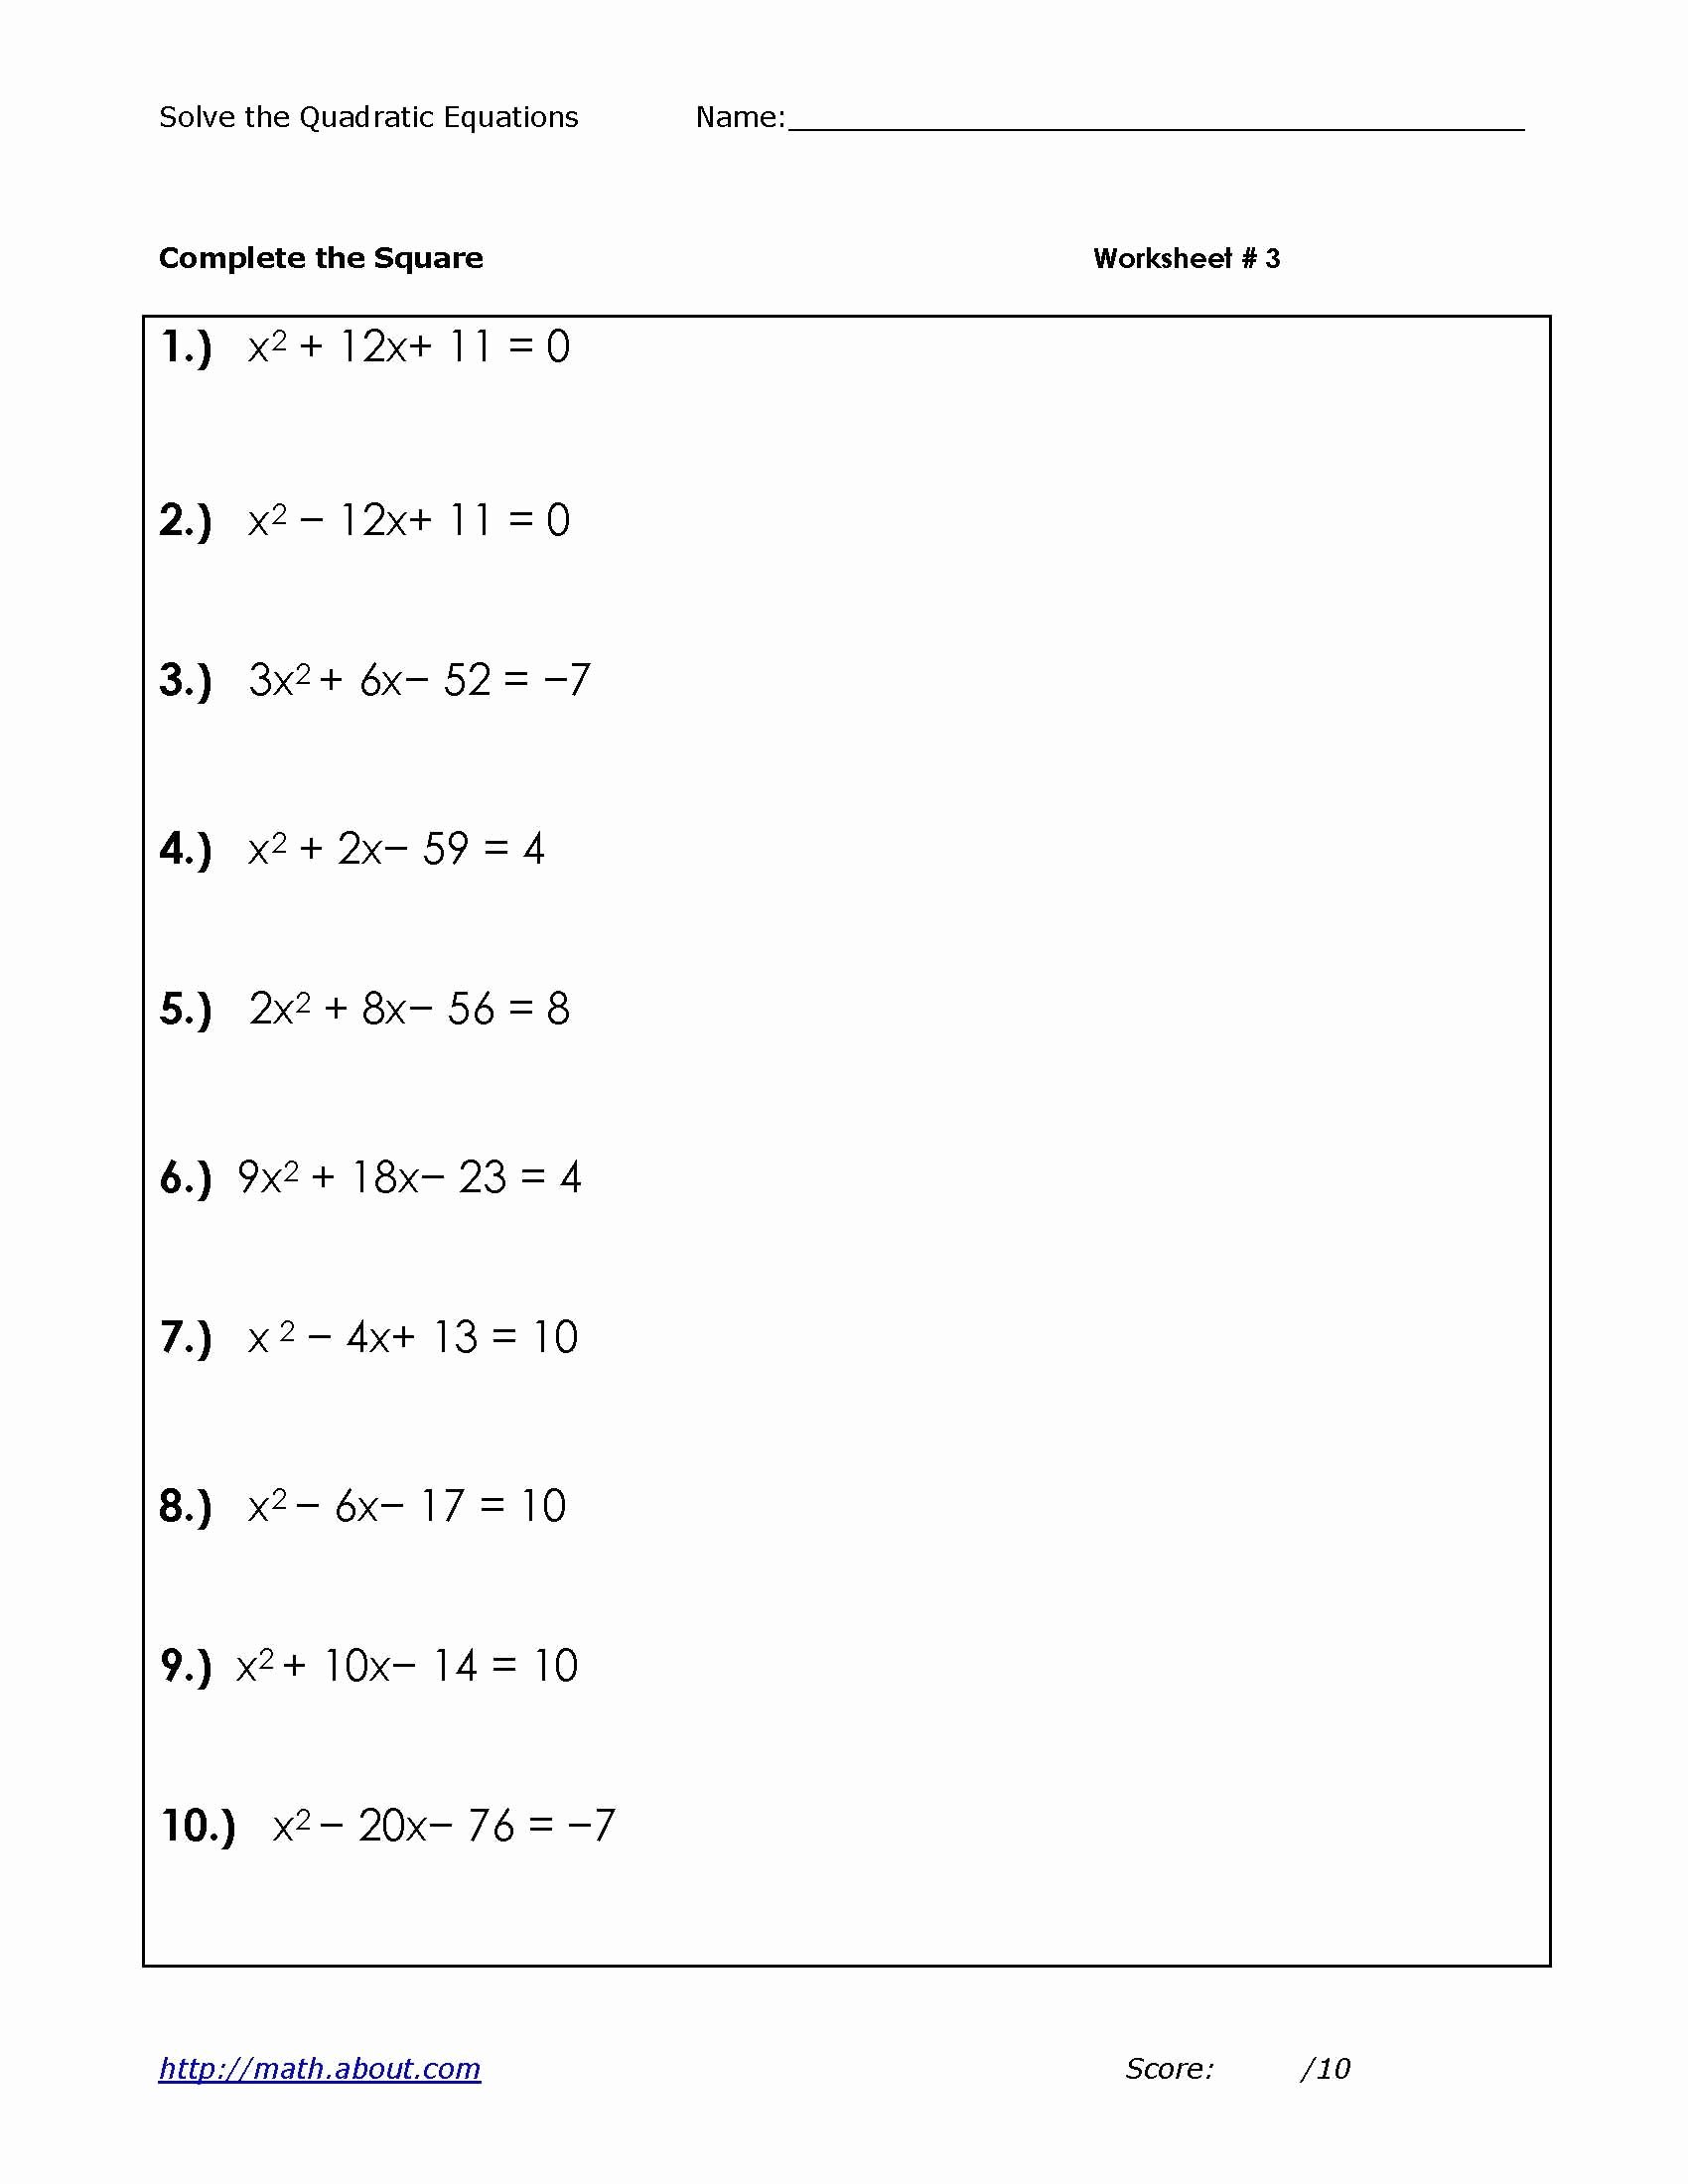 Solving Square Root Equations Worksheet Elegant solve Quadratic Equations by Square Roots Worksheet